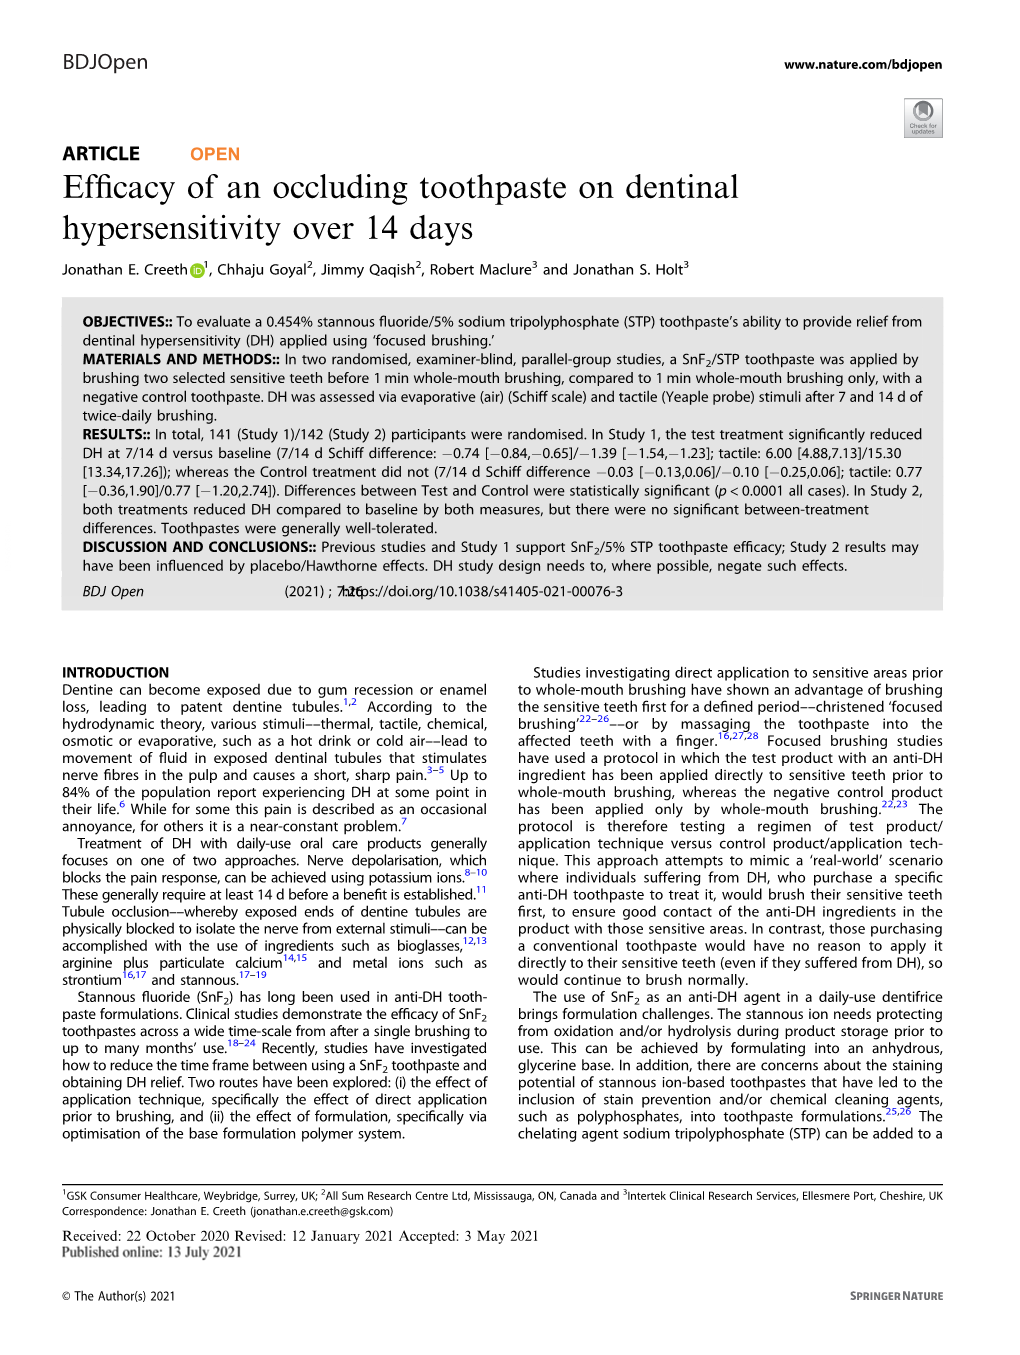 Efficacy of an Occluding Toothpaste on Dentinal Hypersensitivity Over 14 Days